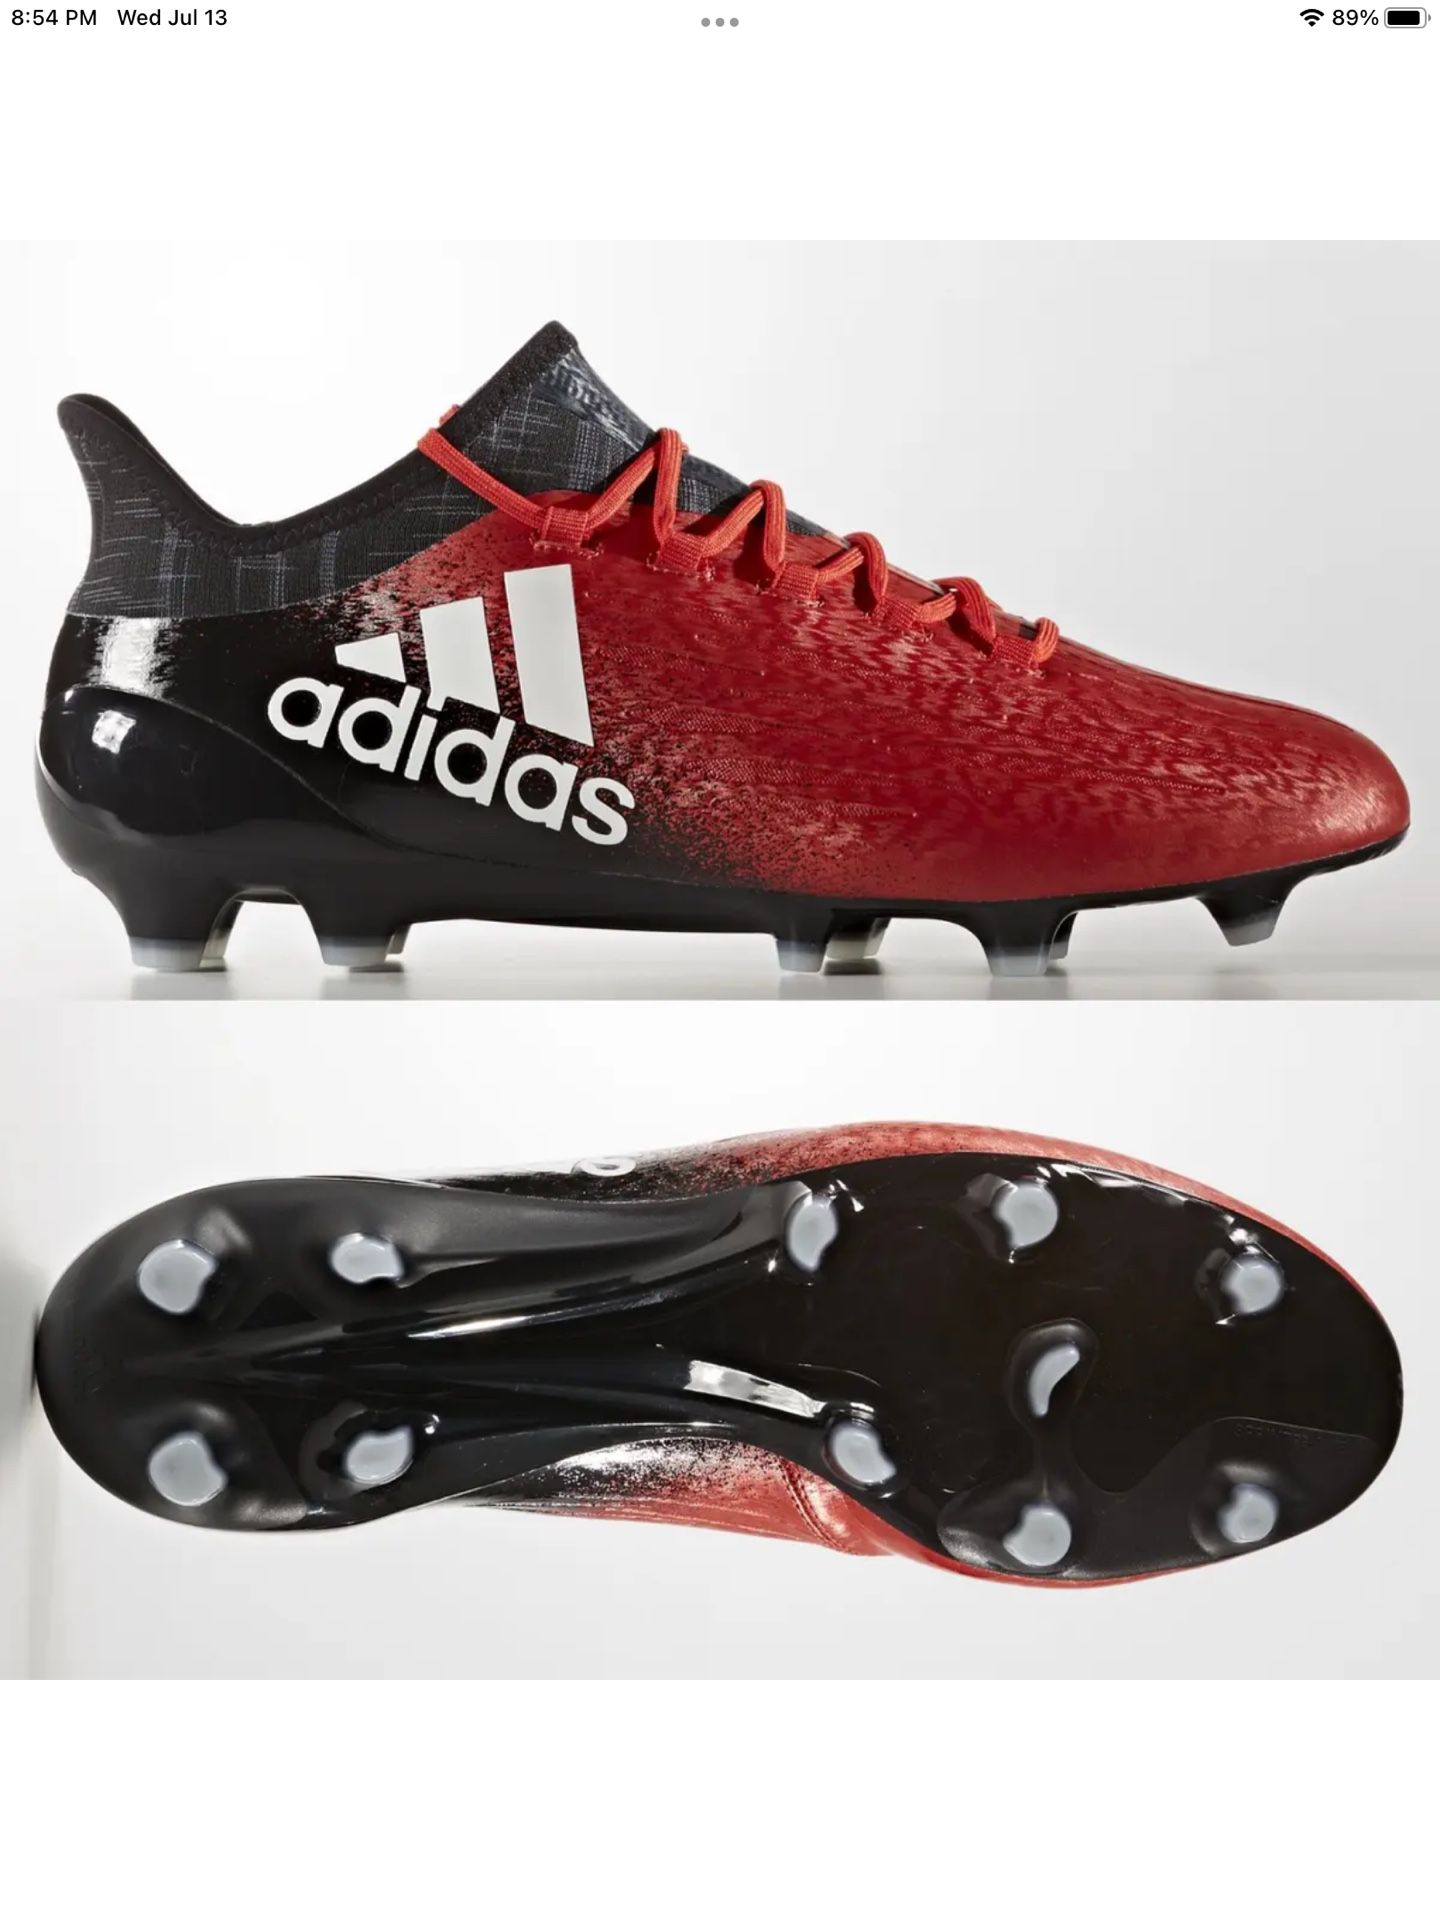 Verniel huisvrouw helikopter ADIDAS X 16.1 FG Men's BB5618 Techfit Red Black Soccer Cleats NEW Size 11.  for Sale in Pasadena, CA - OfferUp